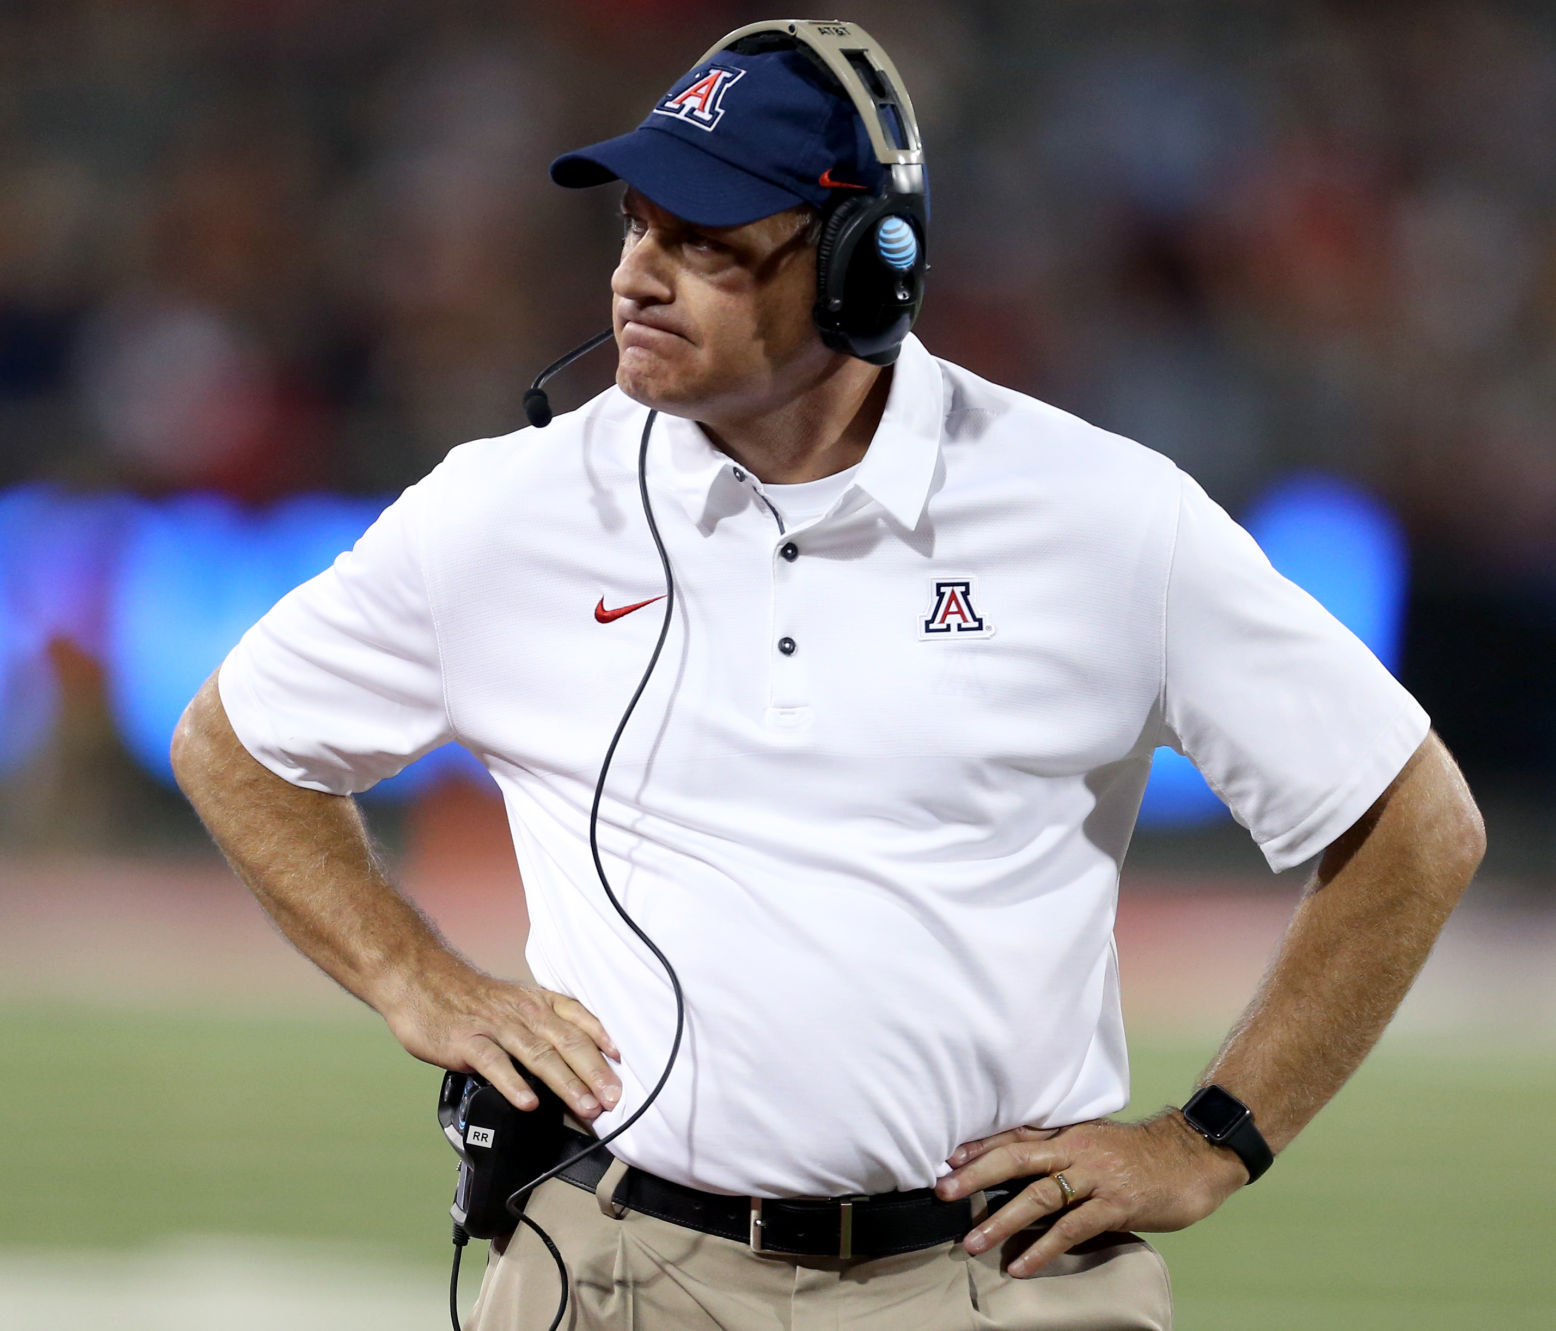 Rich Rodriguezs accuser files additional $8.5 million claim against fired coach, UA athletic department